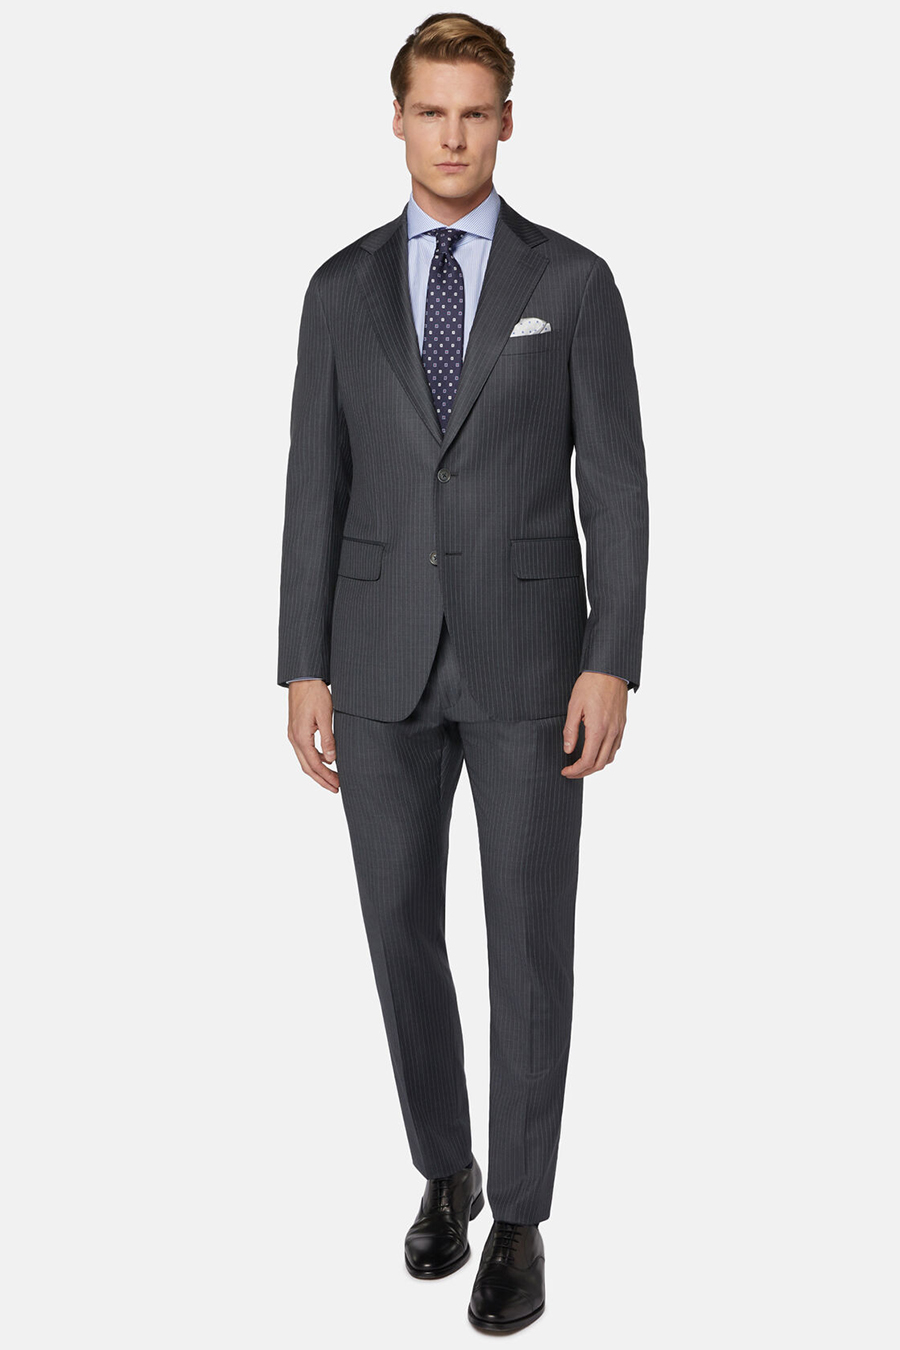 Dark gray pinstripe suit, sky blue shirt, and black leather oxford shoes outfit